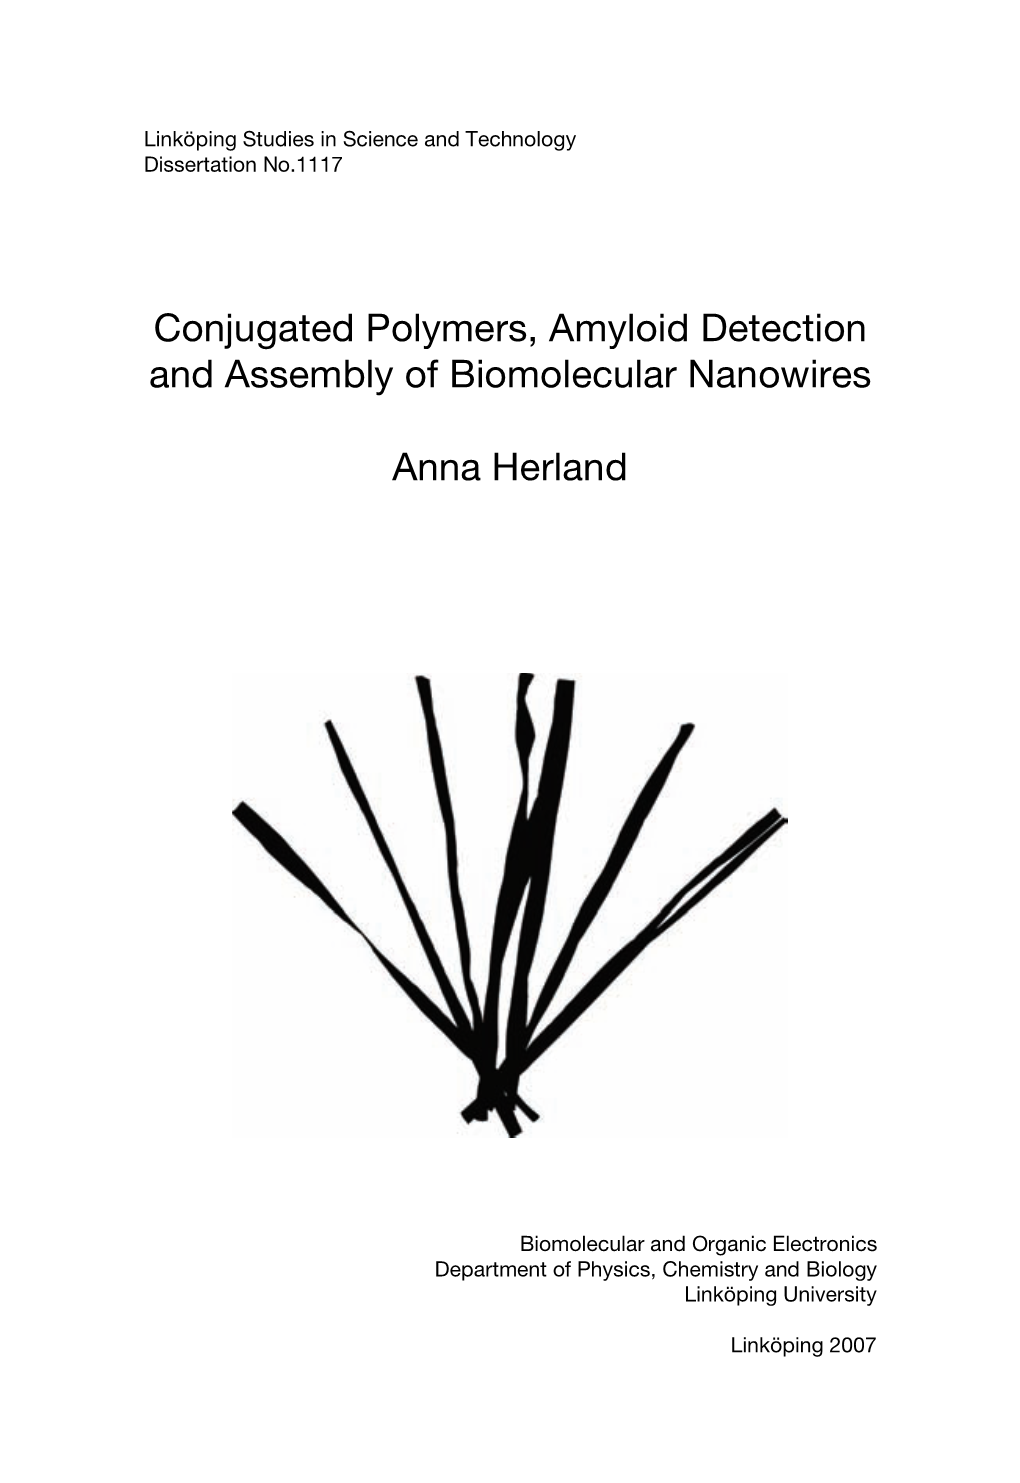 Conjugated Polymers, Amyloid Detection and Assembly of Biomolecular Nanowires